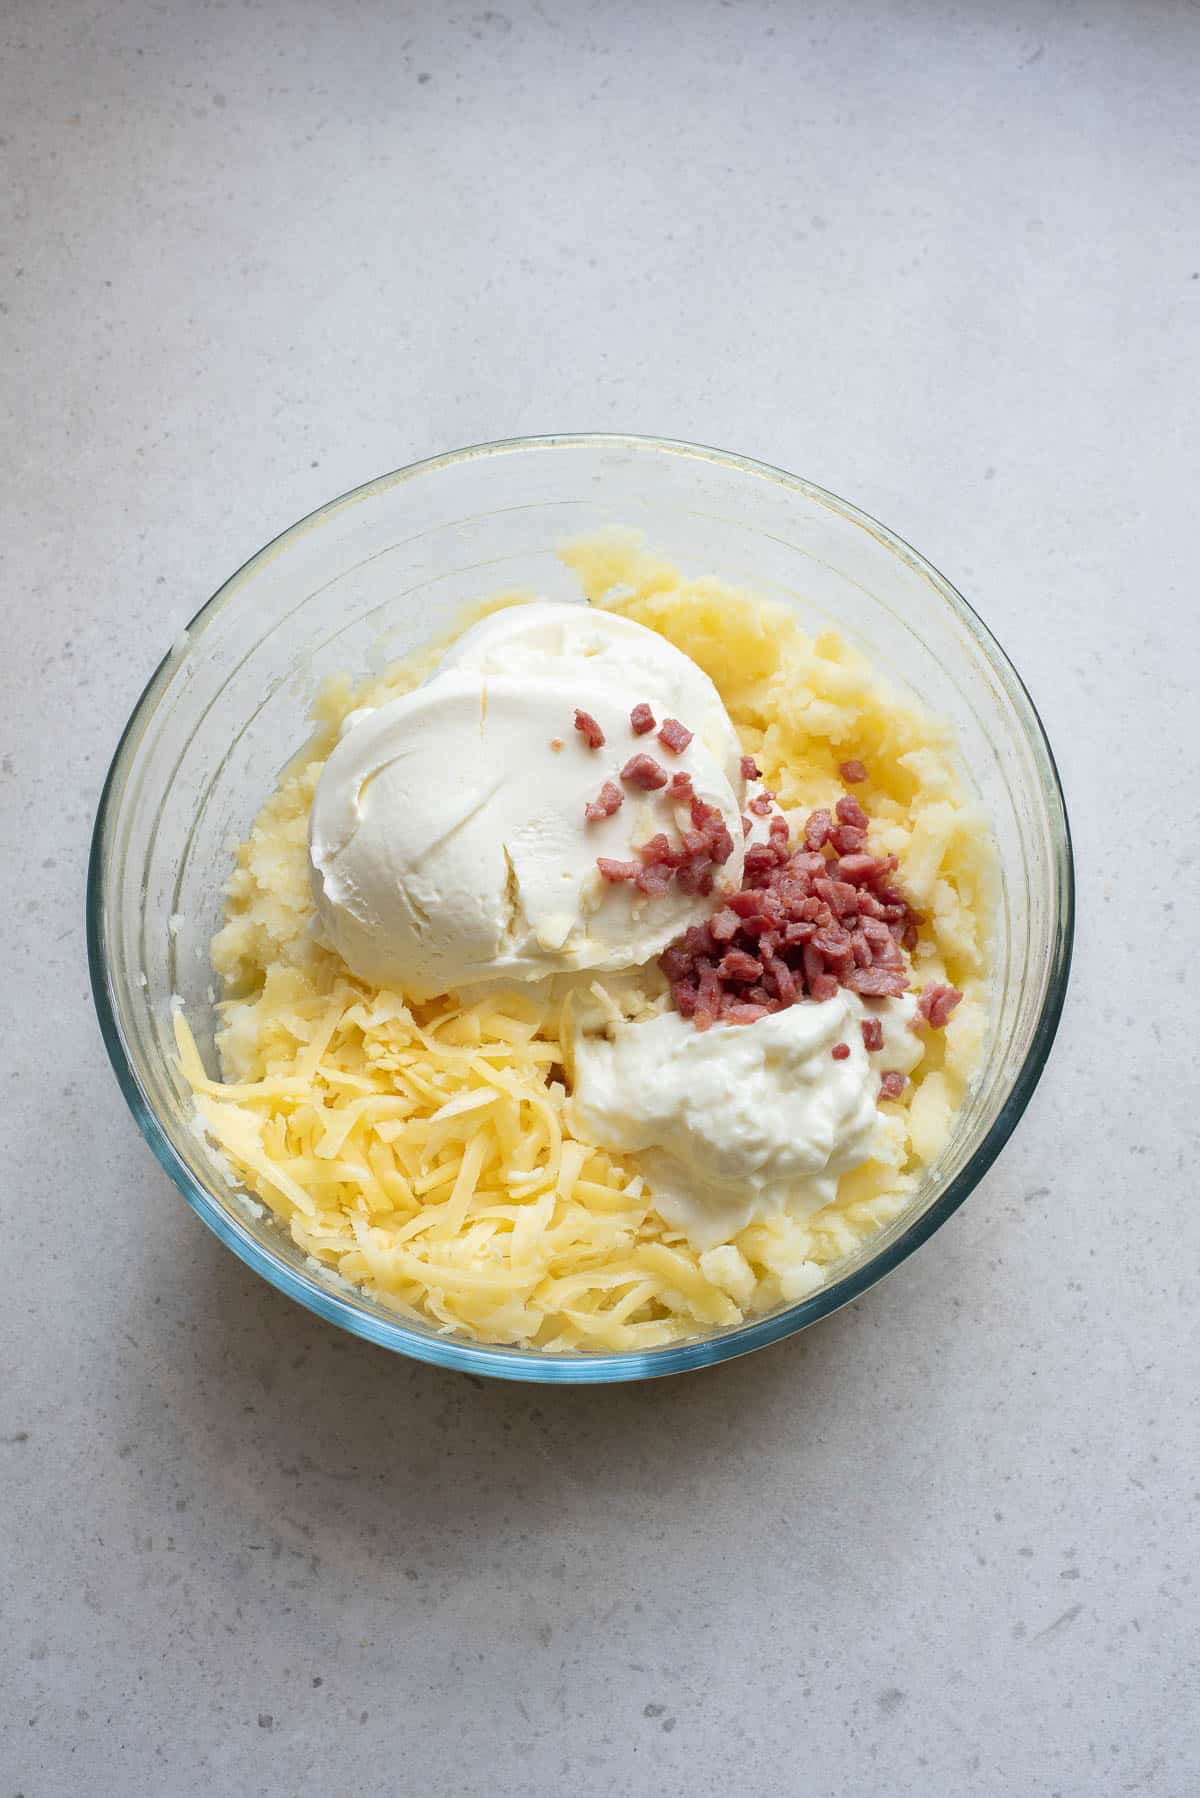 Potatoes, cream cheese, sour cream, bacon, and cheese in a glass bowl.